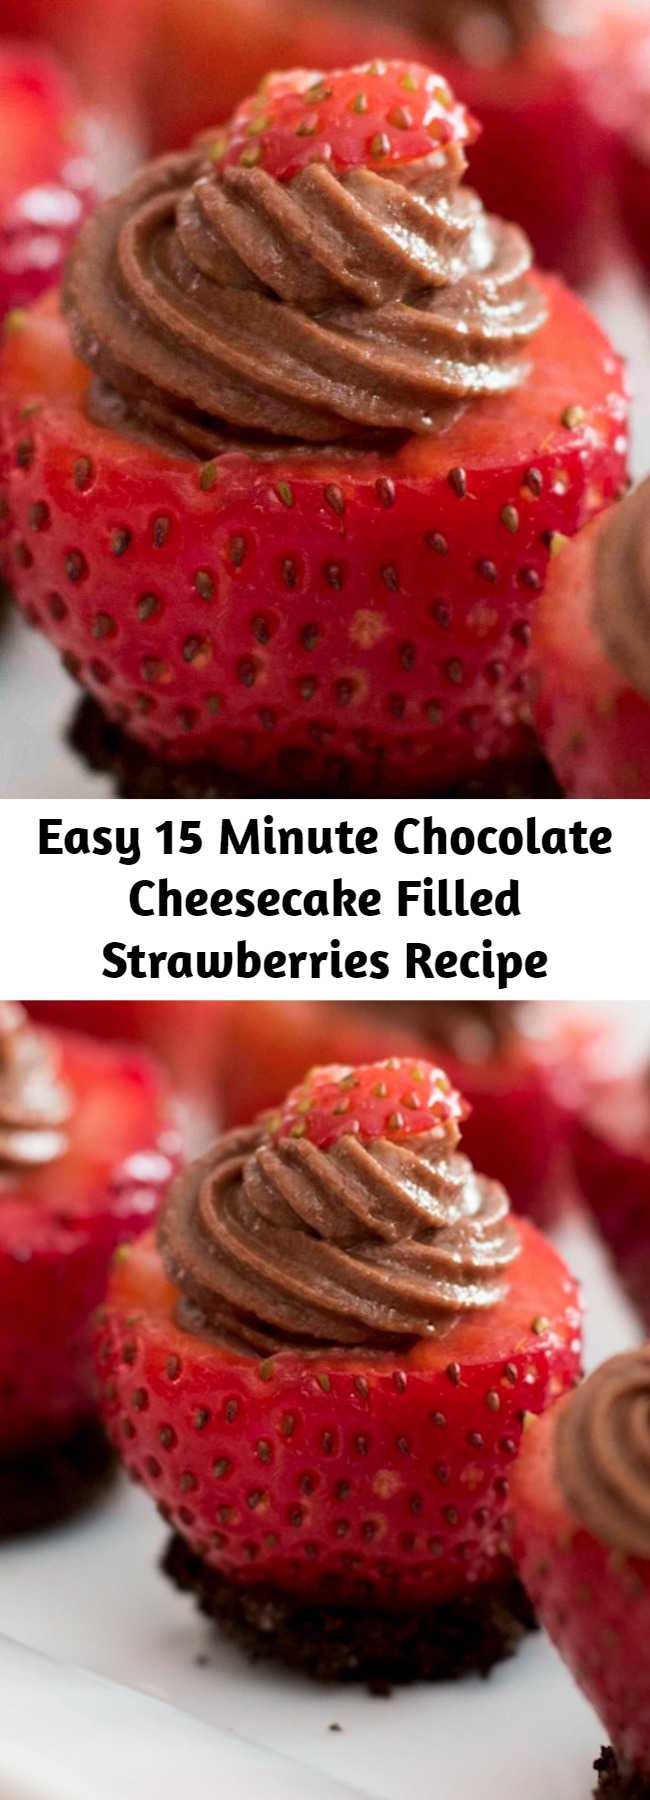 Easy 15 Minute Chocolate Cheesecake Filled Strawberries Recipe - Chocolate Cheesecake Filled Strawberries- mouthwatering and creamy chocolate cheesecake stuffed in fresh strawberries. A no-bake dessert takes only 15 minutes to make! It’s perfect to make ahead of time for a party or holiday with friends and family.